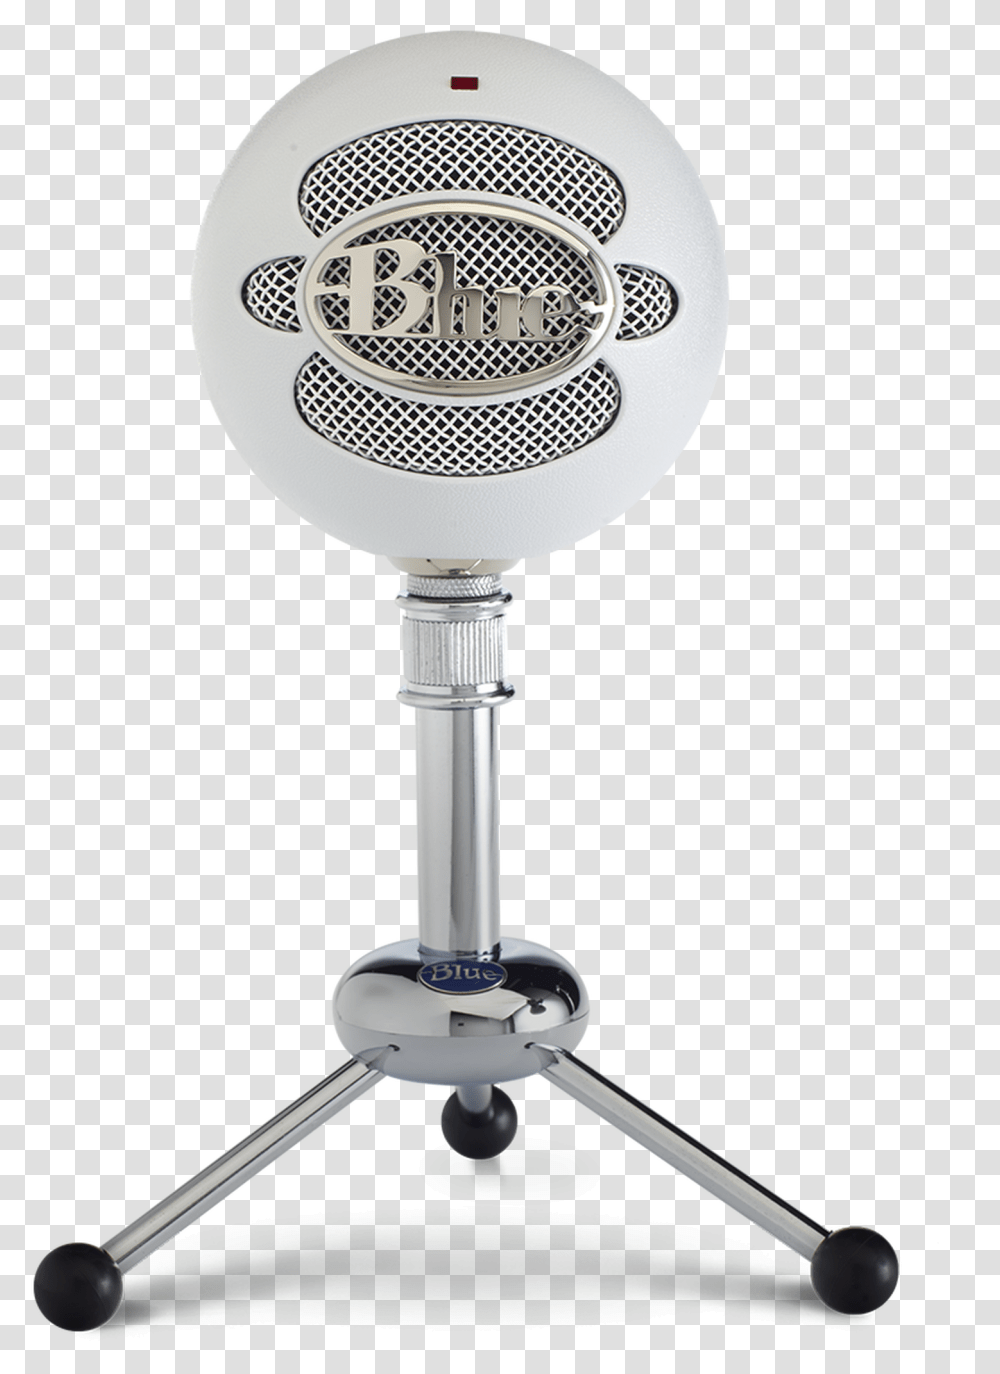 Blue Snowball Mic Blue Snowball, Electrical Device, Microphone, Lamp, Tripod Transparent Png